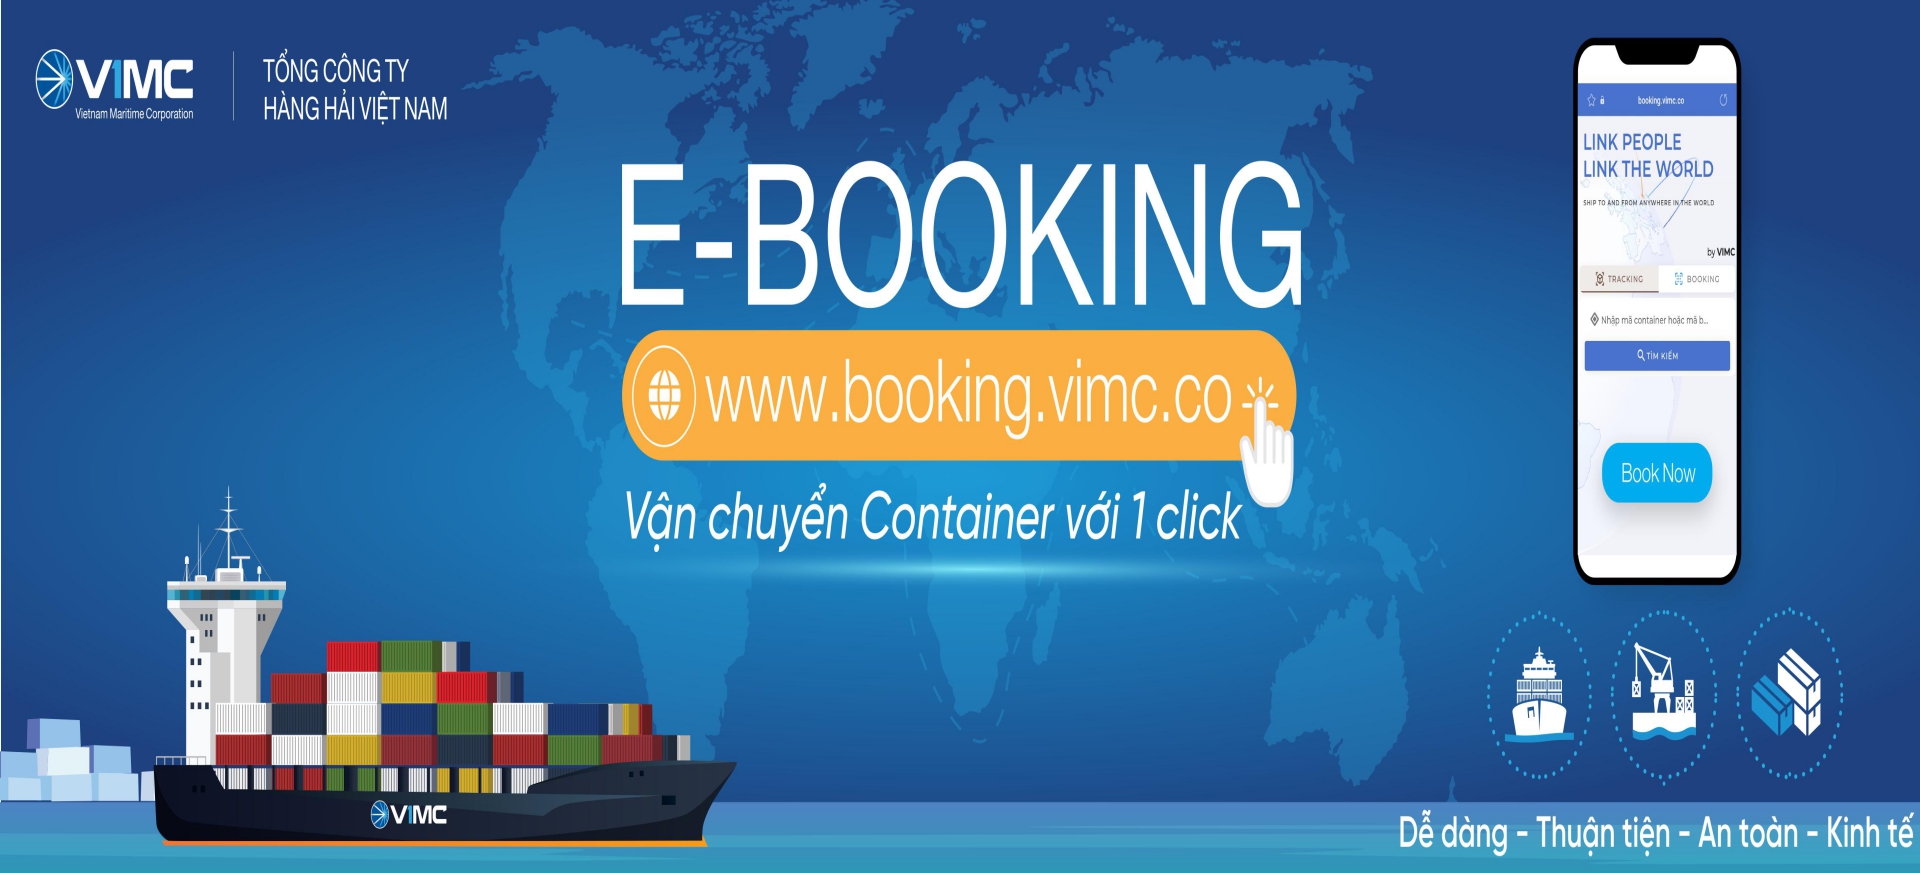 Booking_Banner_web_1